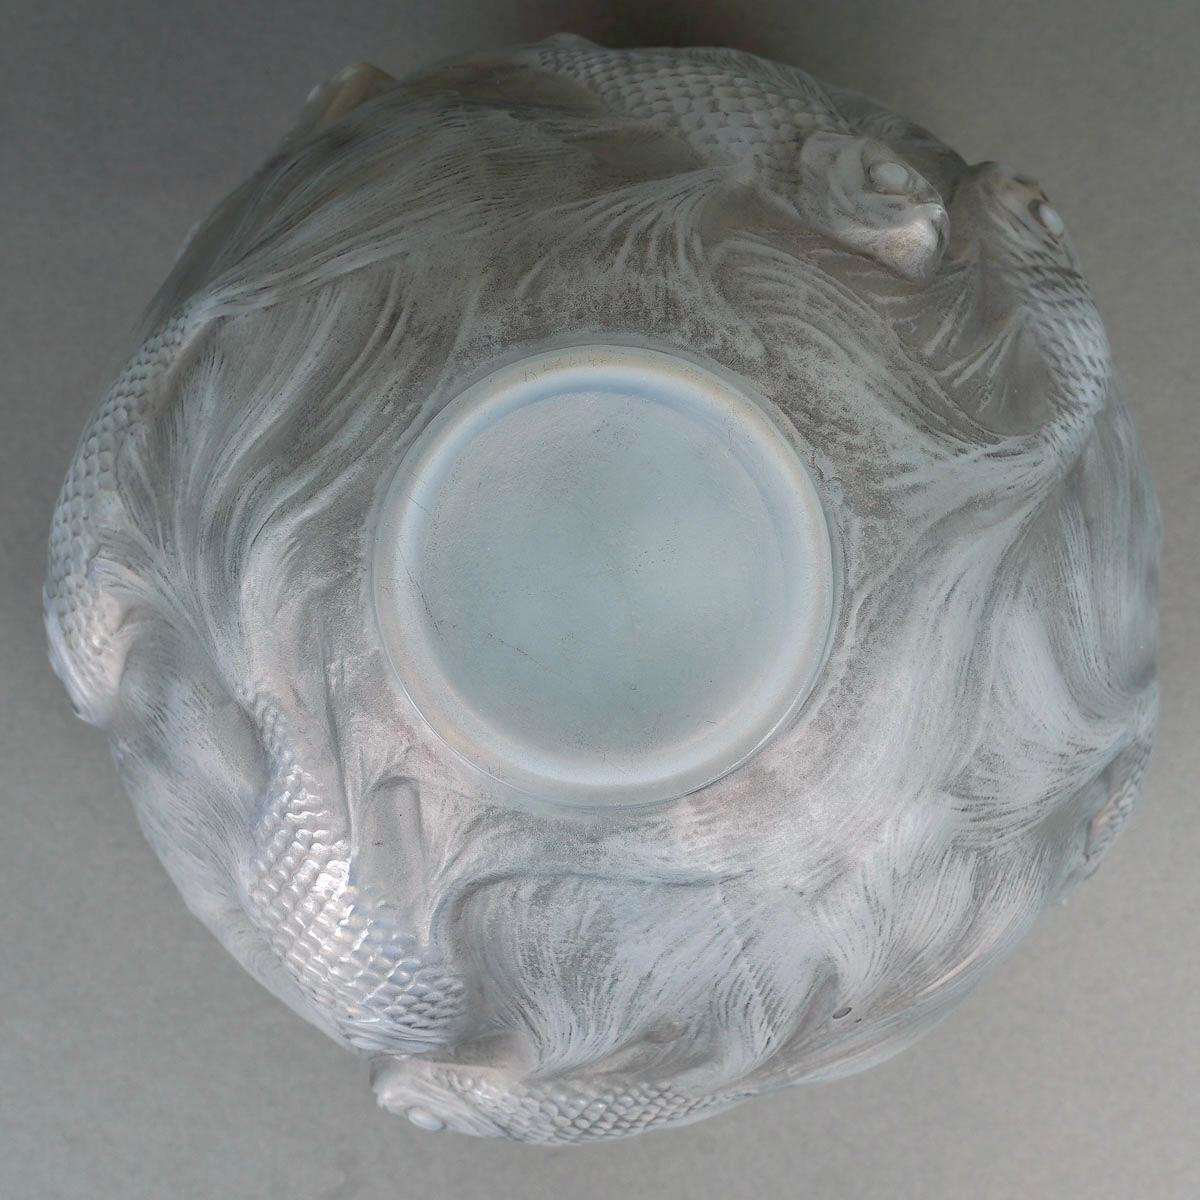 Molded 1924 Rene Lalique, Vase Formose Cased Opalescent Glass with Grey Patina